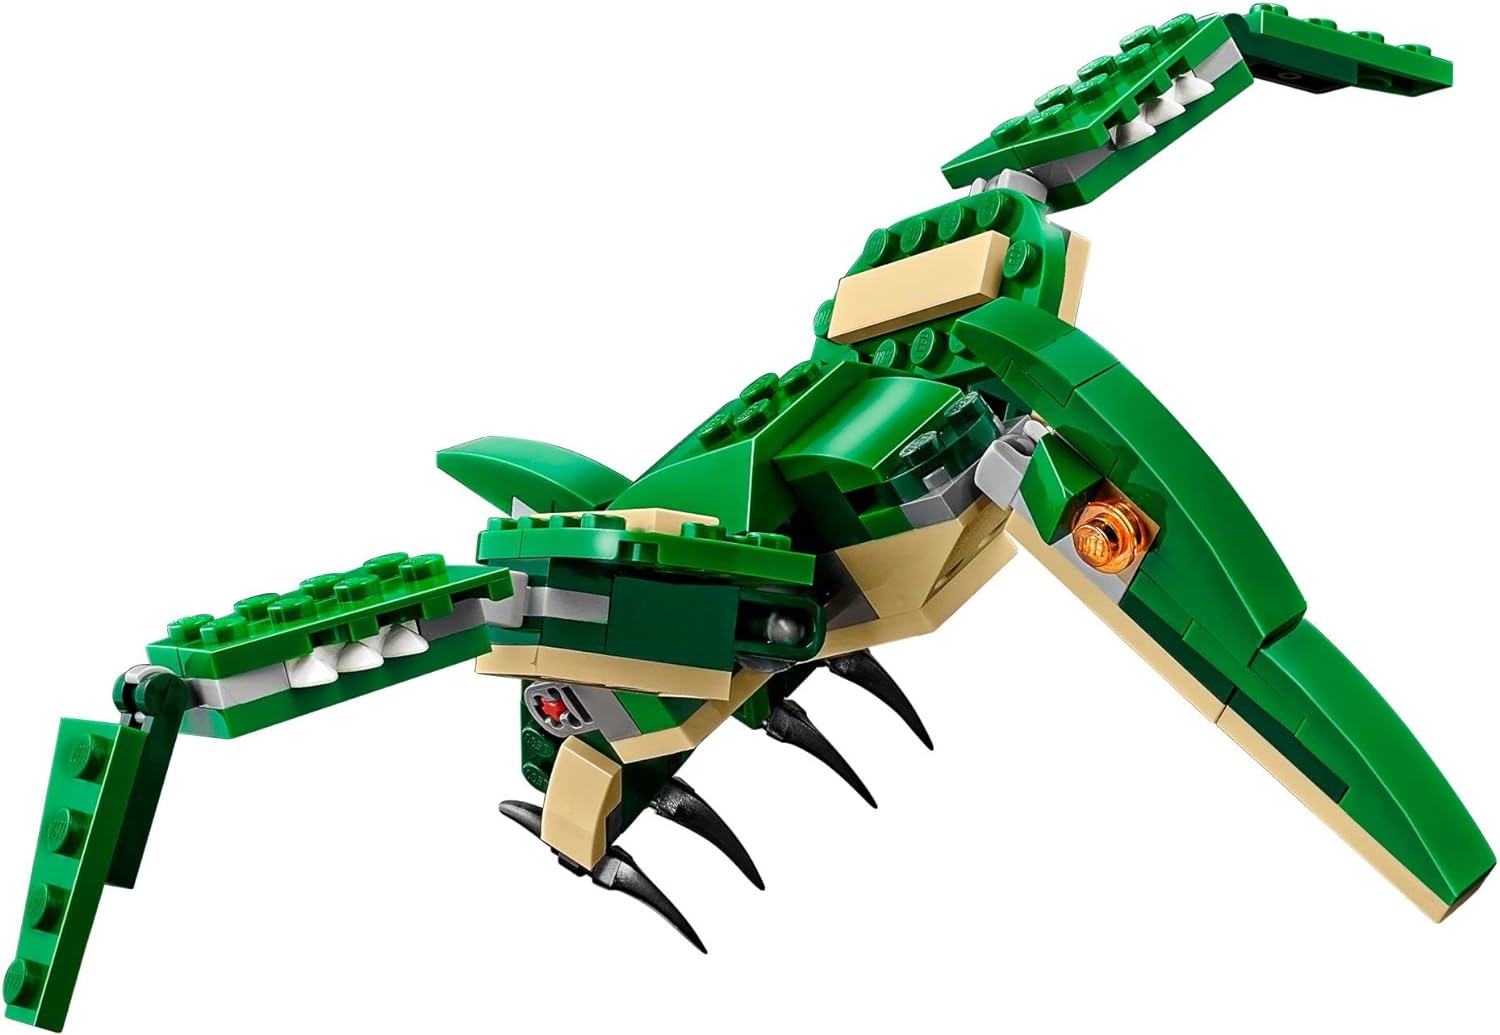 You are currently viewing LEGO Creator 3 in 1 Mighty Dinosaur Toy Review